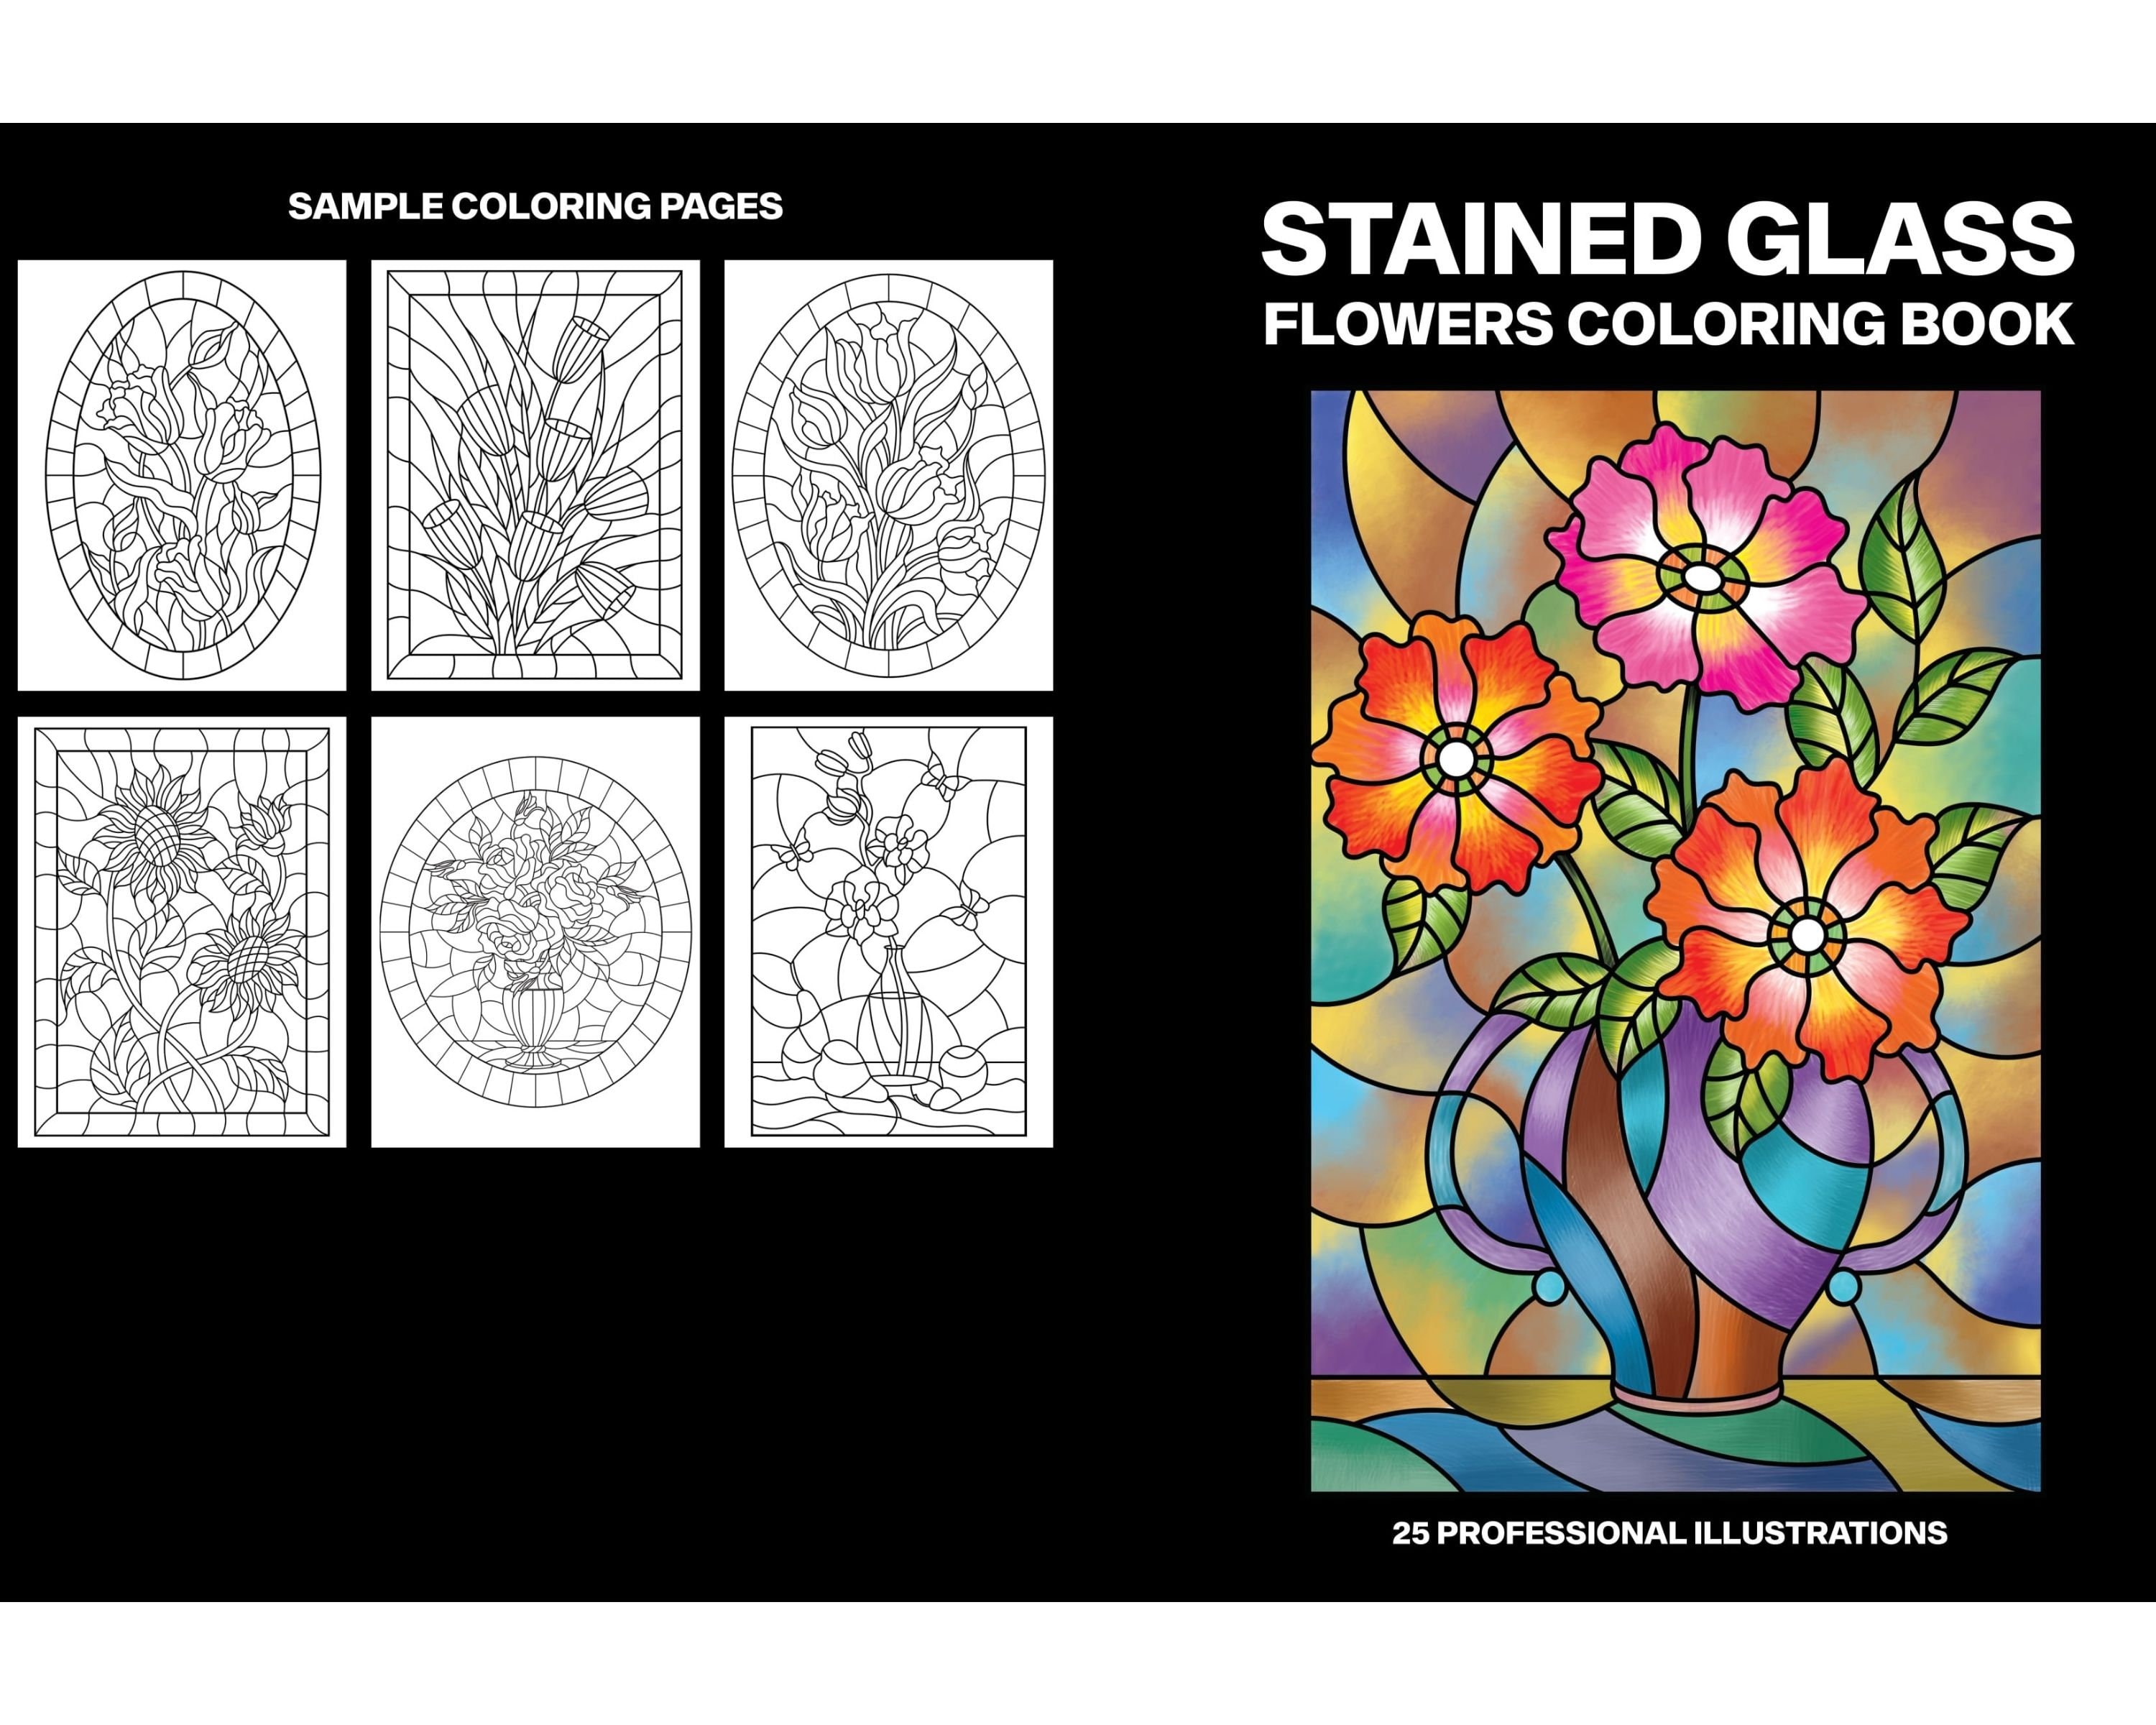 Printable flower stained glass coloring pages floral coloring sheets adult coloring book coloring activities floral color pages download now